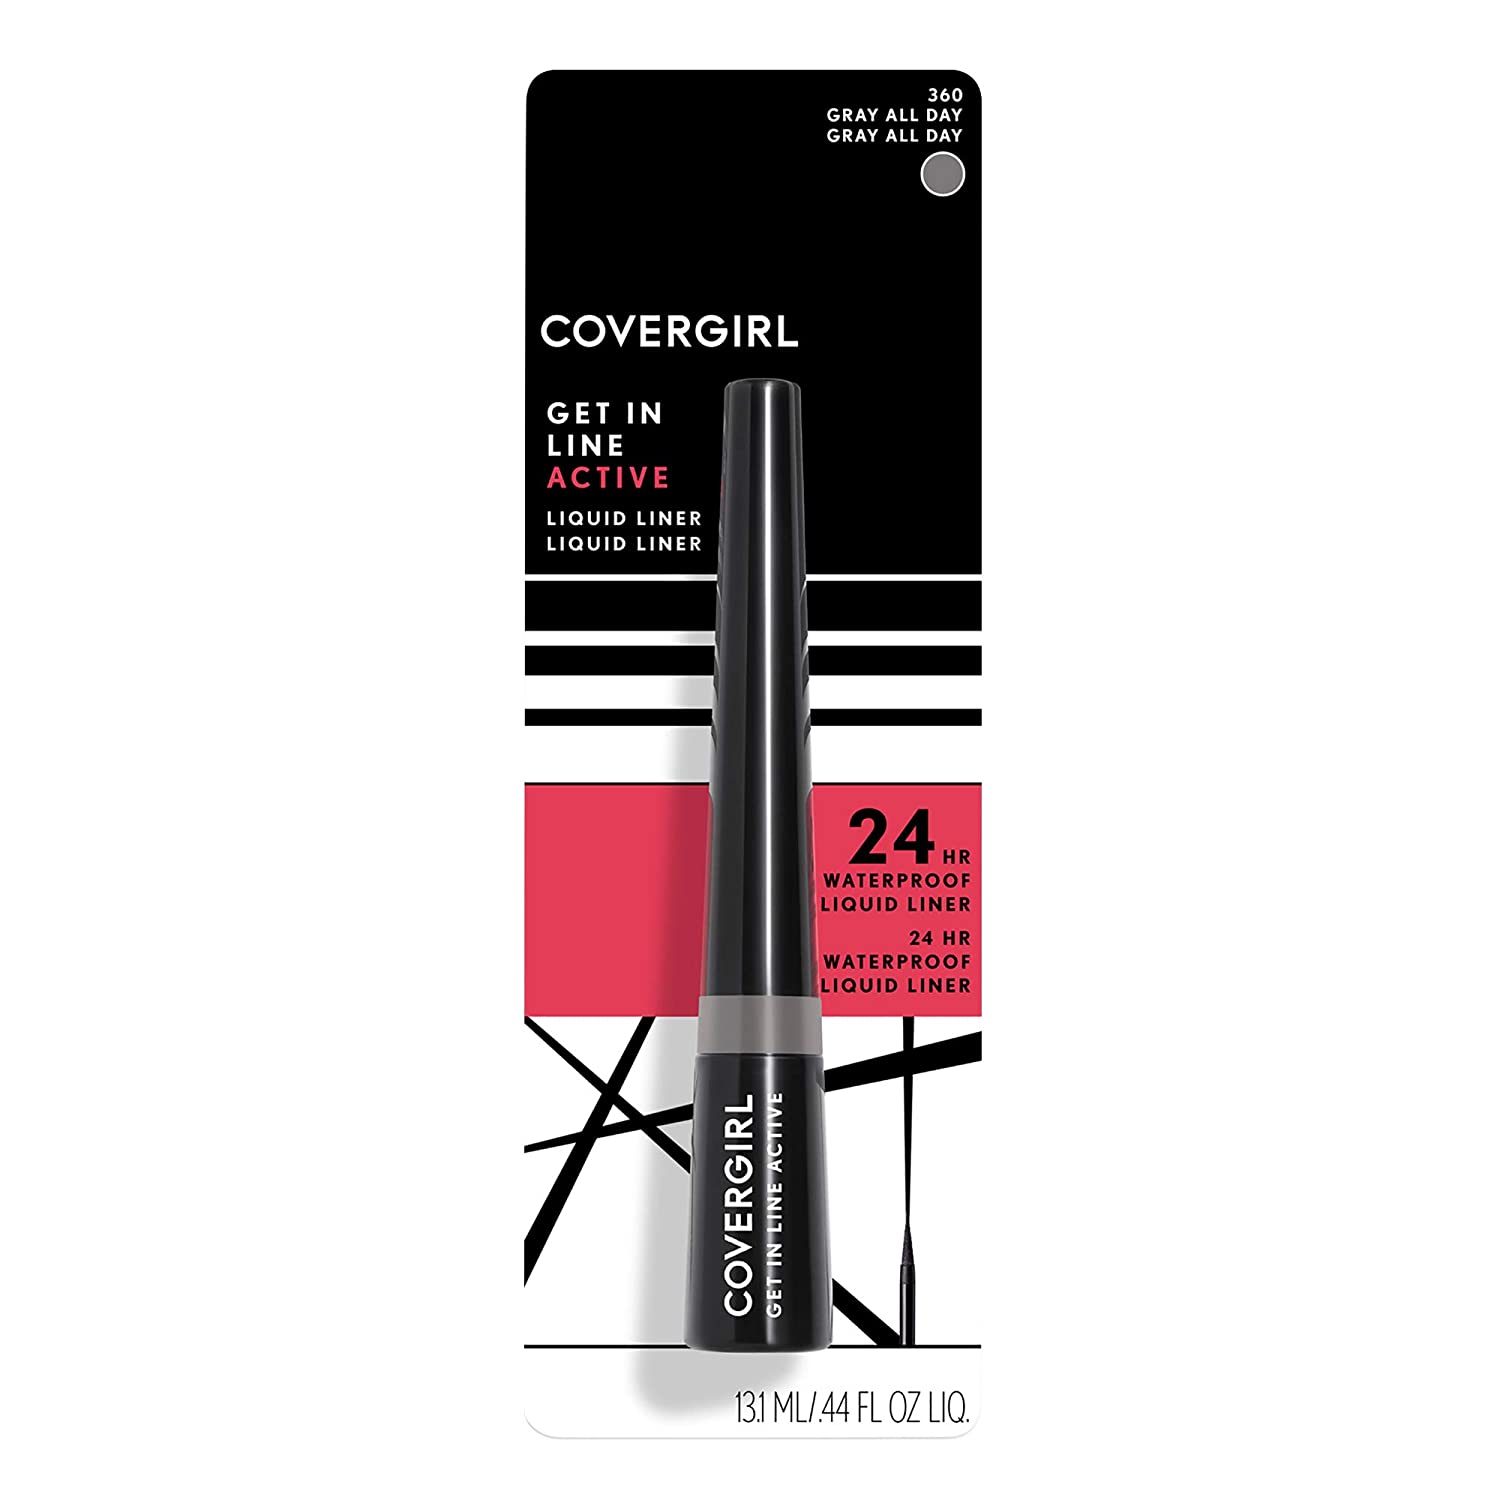 CoverGirl Get In Line Active Liquid Eyeliner, Gray All Day 360